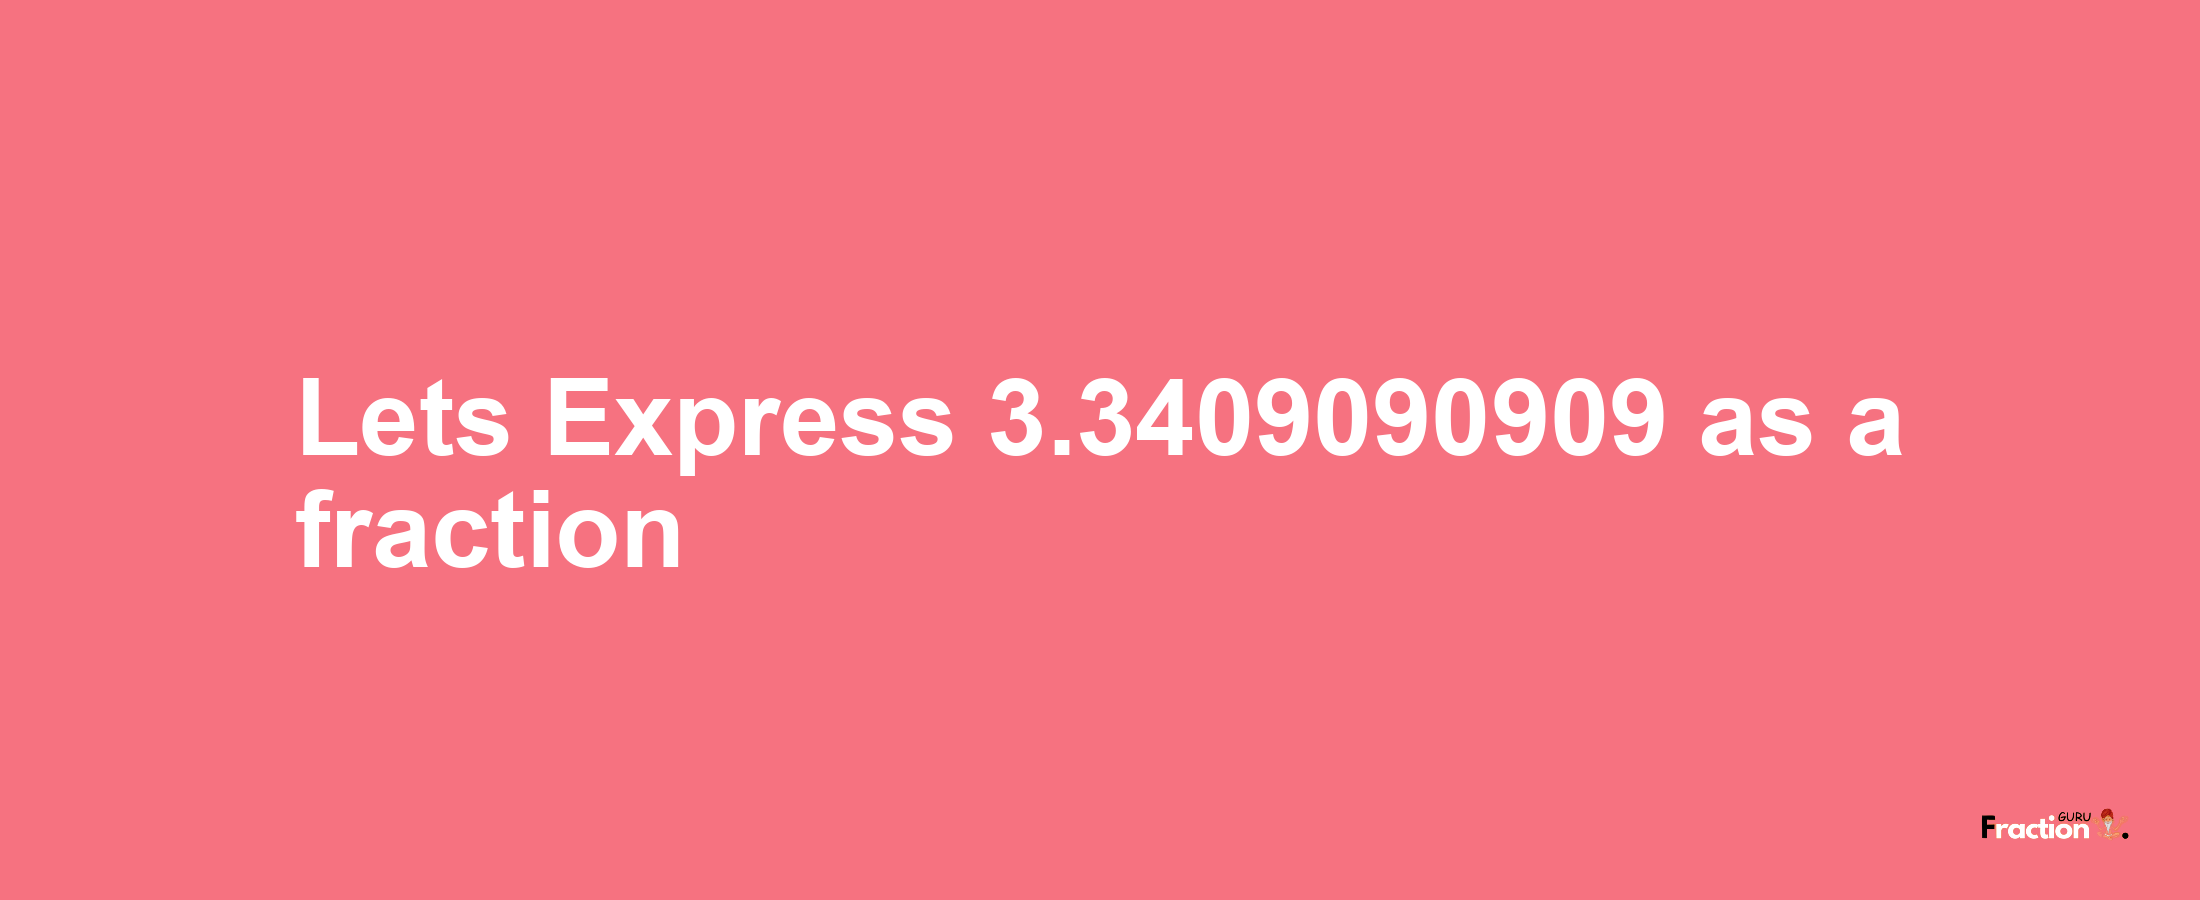 Lets Express 3.3409090909 as afraction